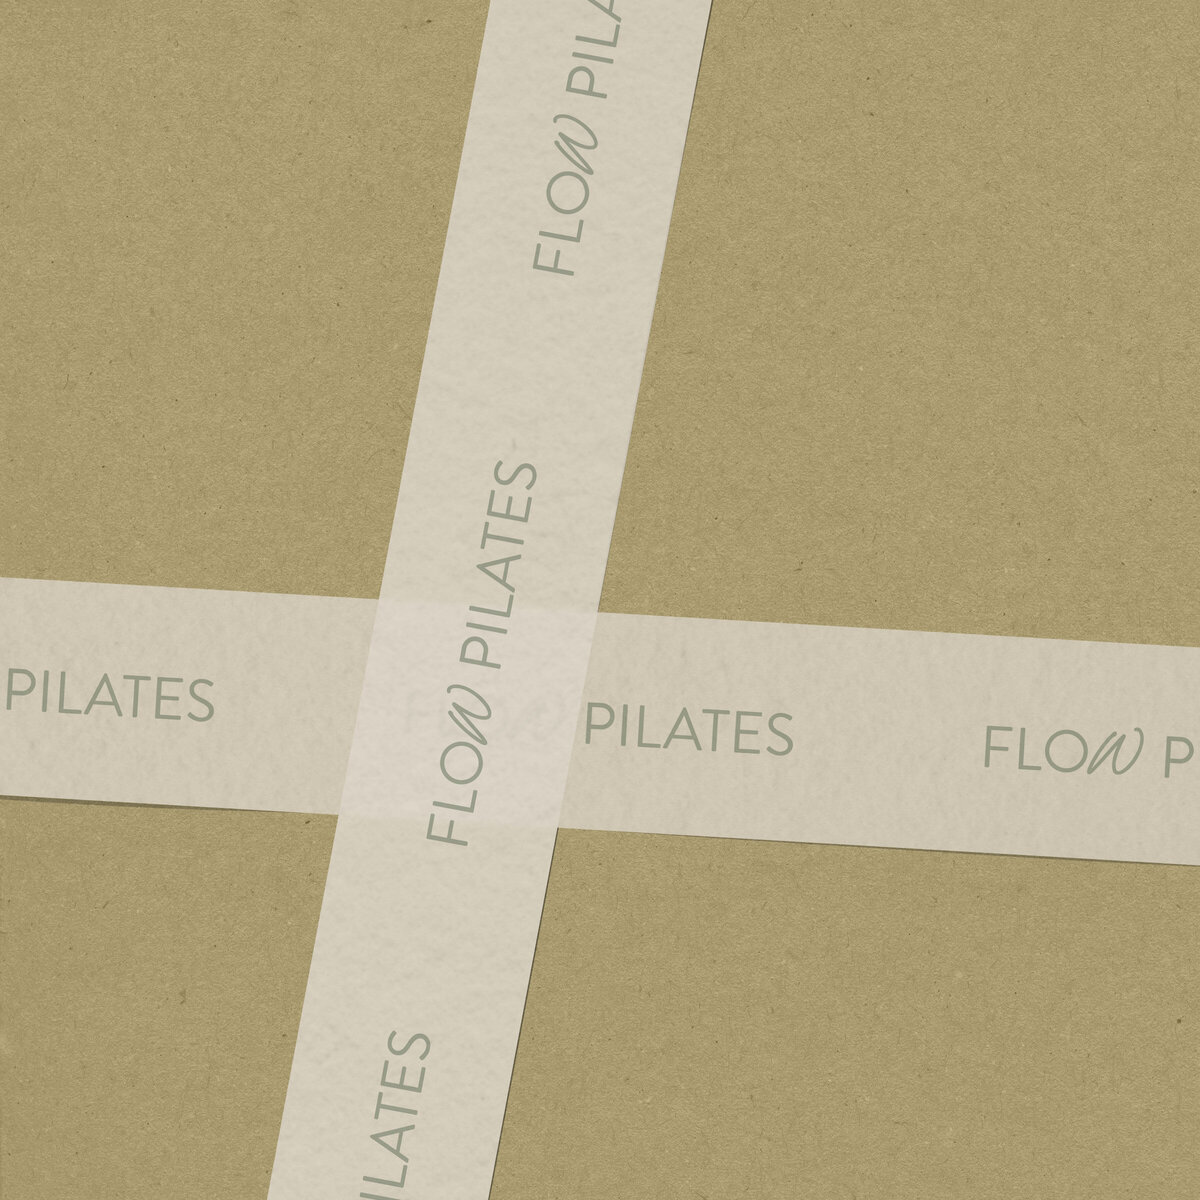 Pilates business packaging design with tape mockup